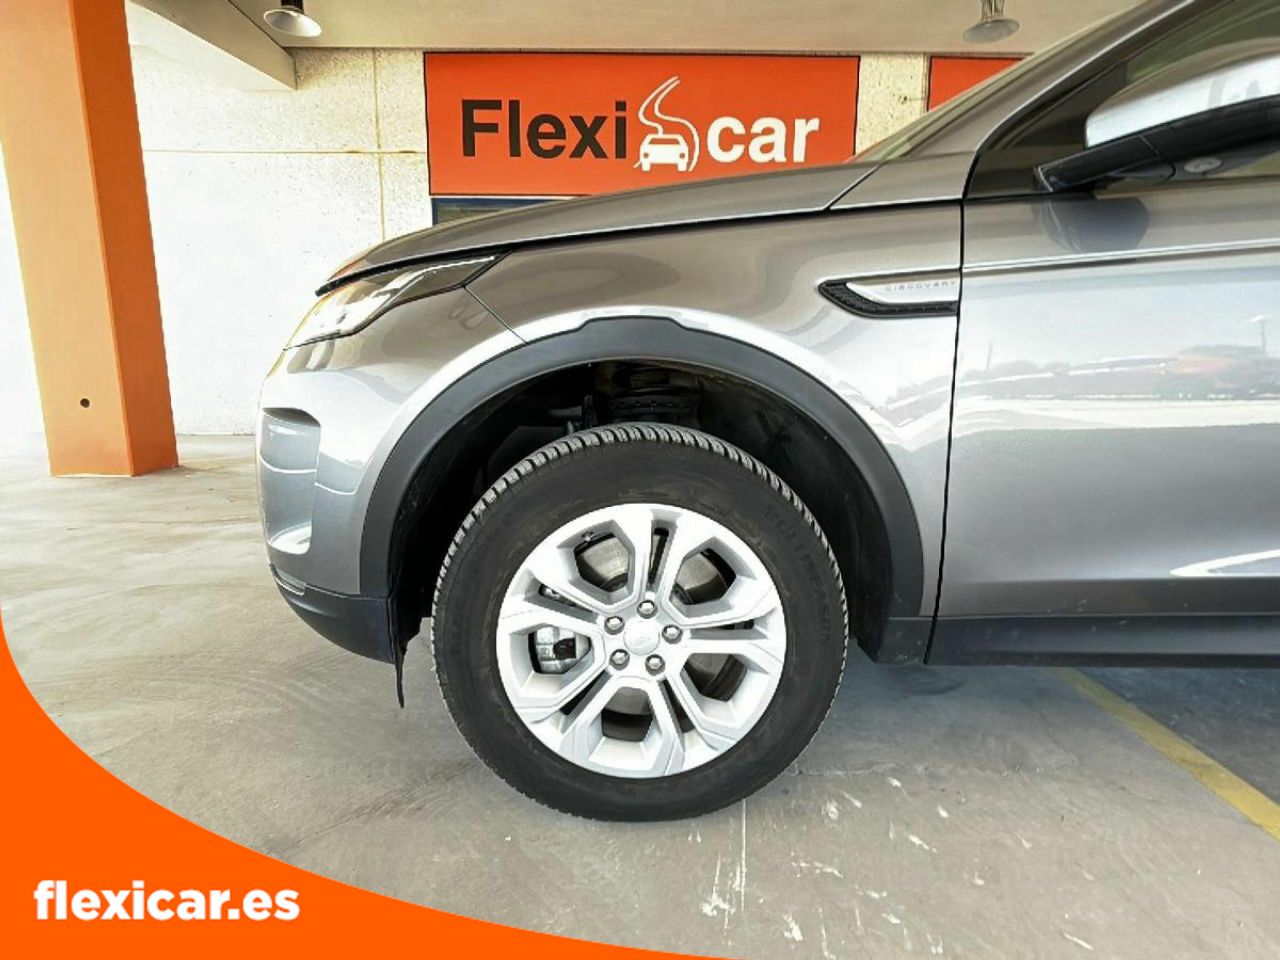 Foto Land-Rover Discovery Sport 21